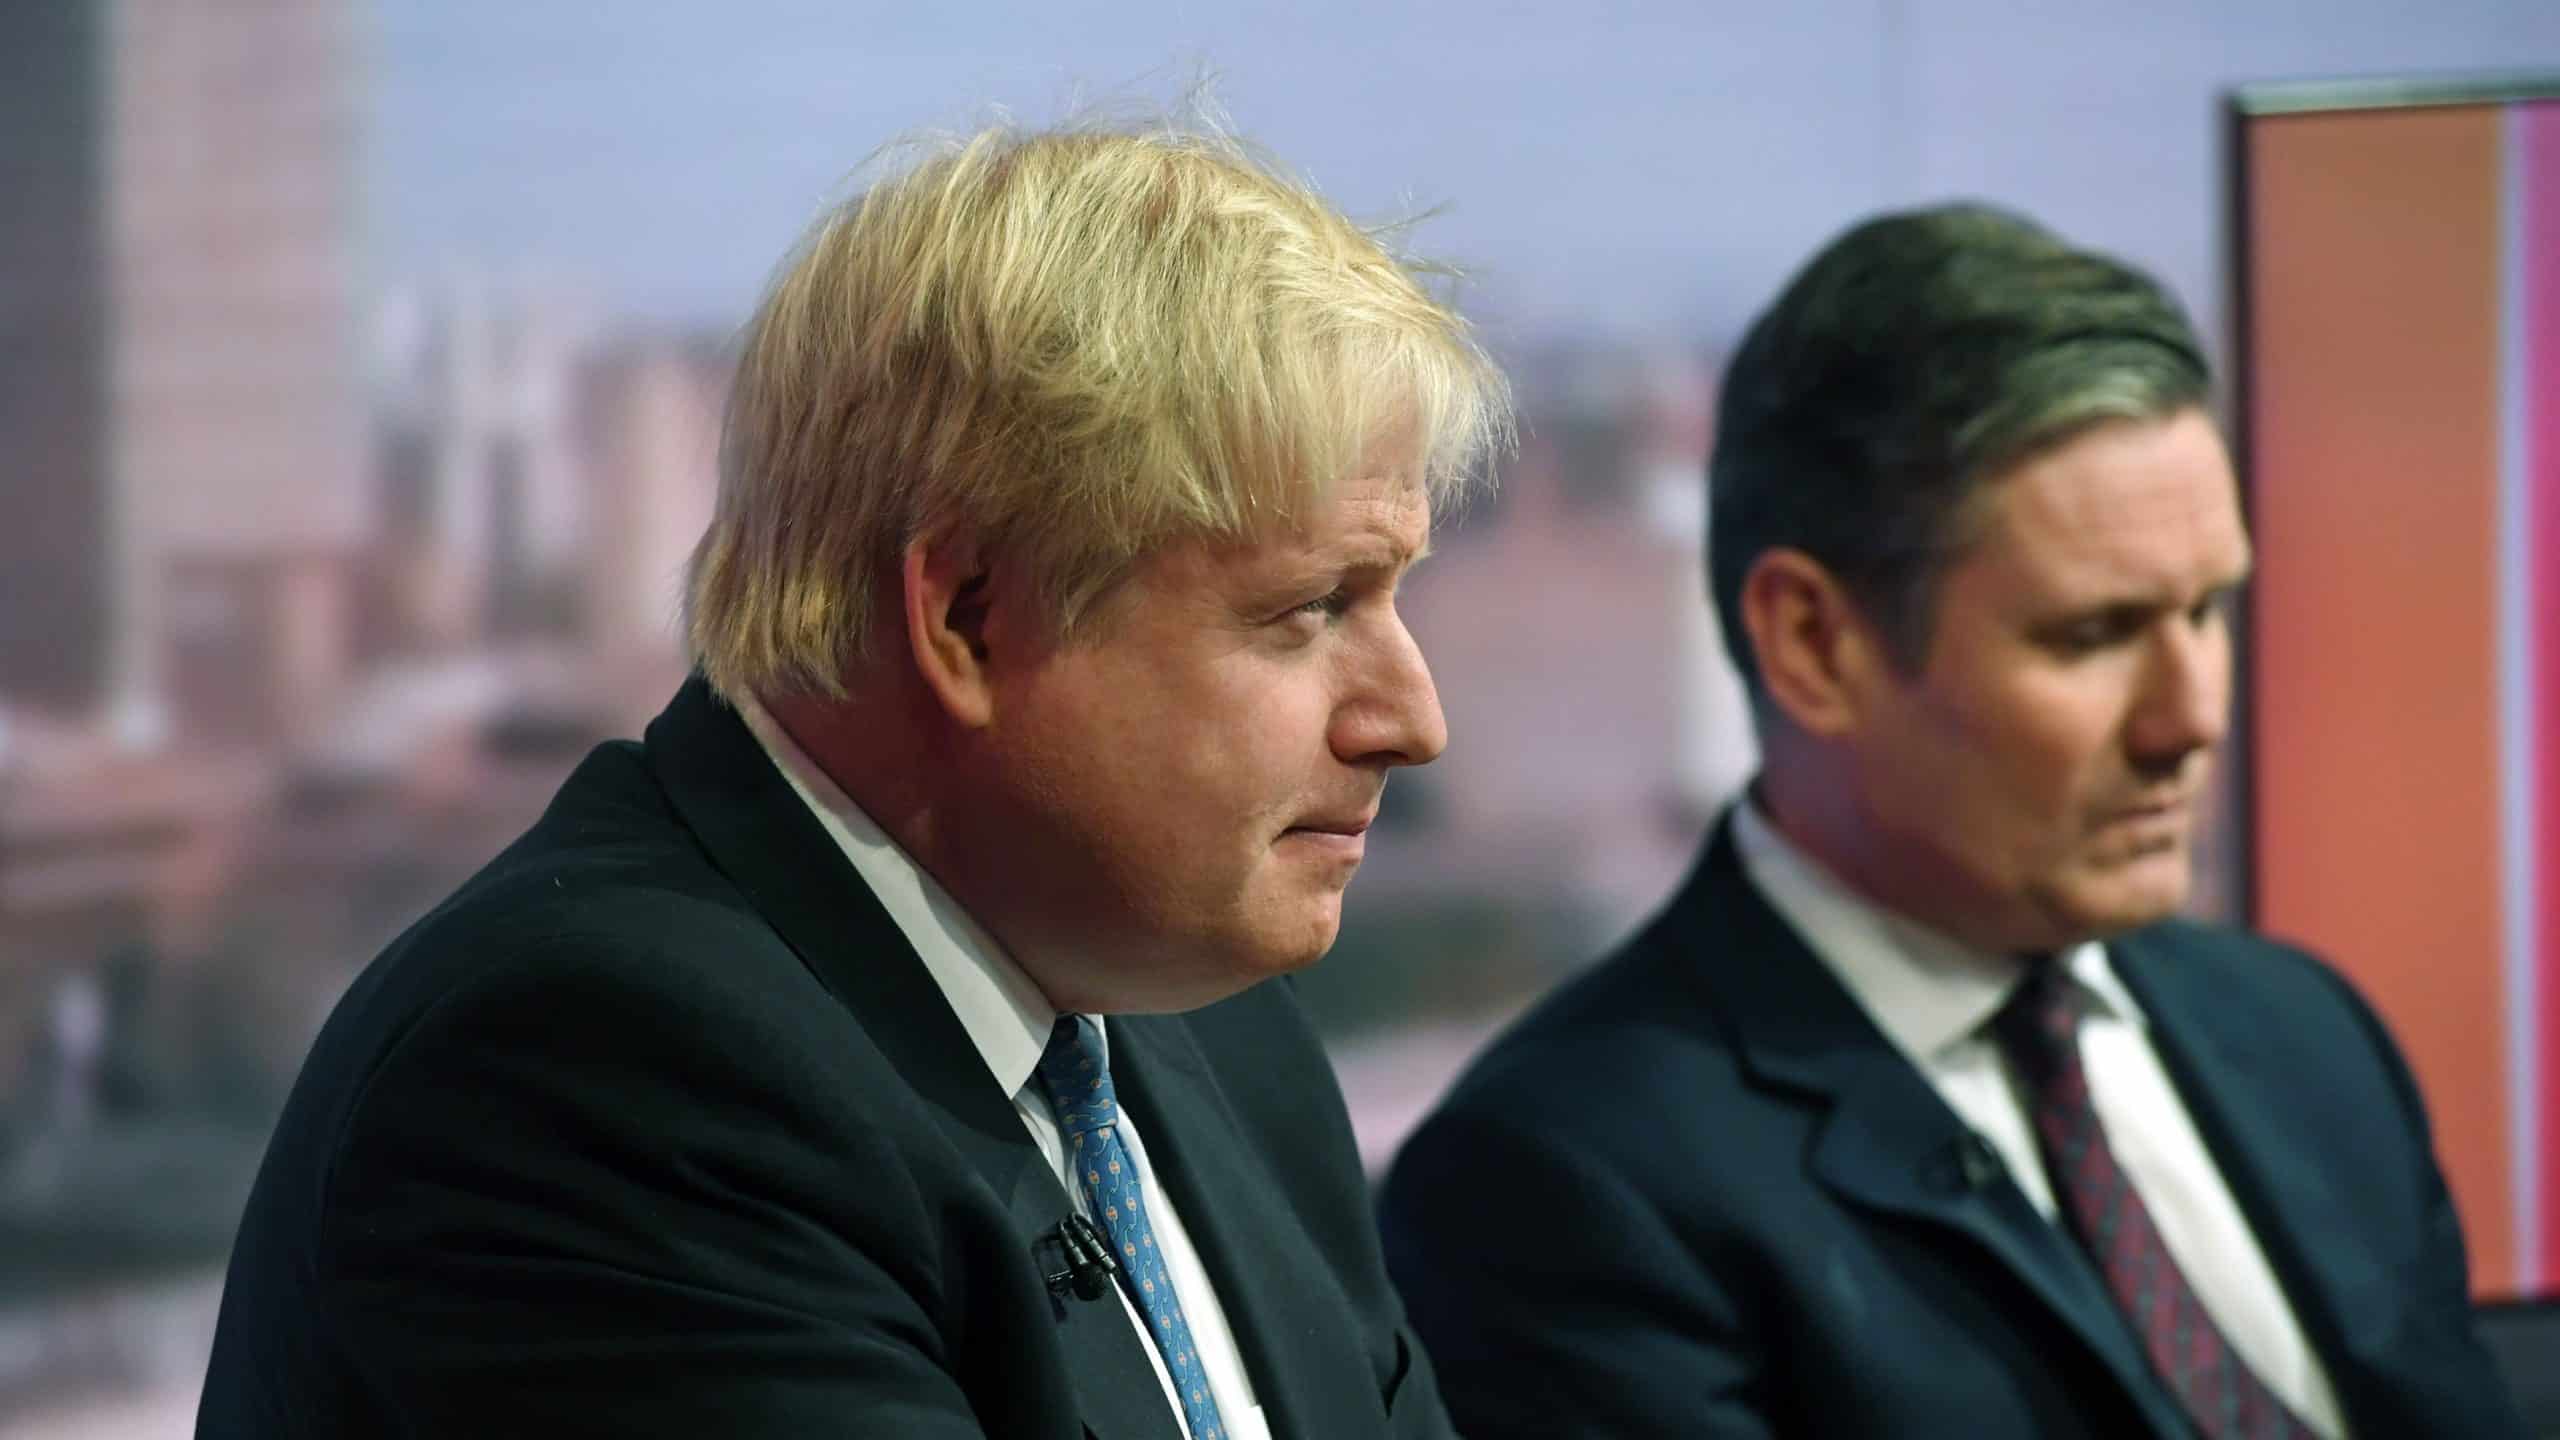 Sir Keir Starmer accuses ‘shameful’ Johnson of trying to shift blame on Covid-19